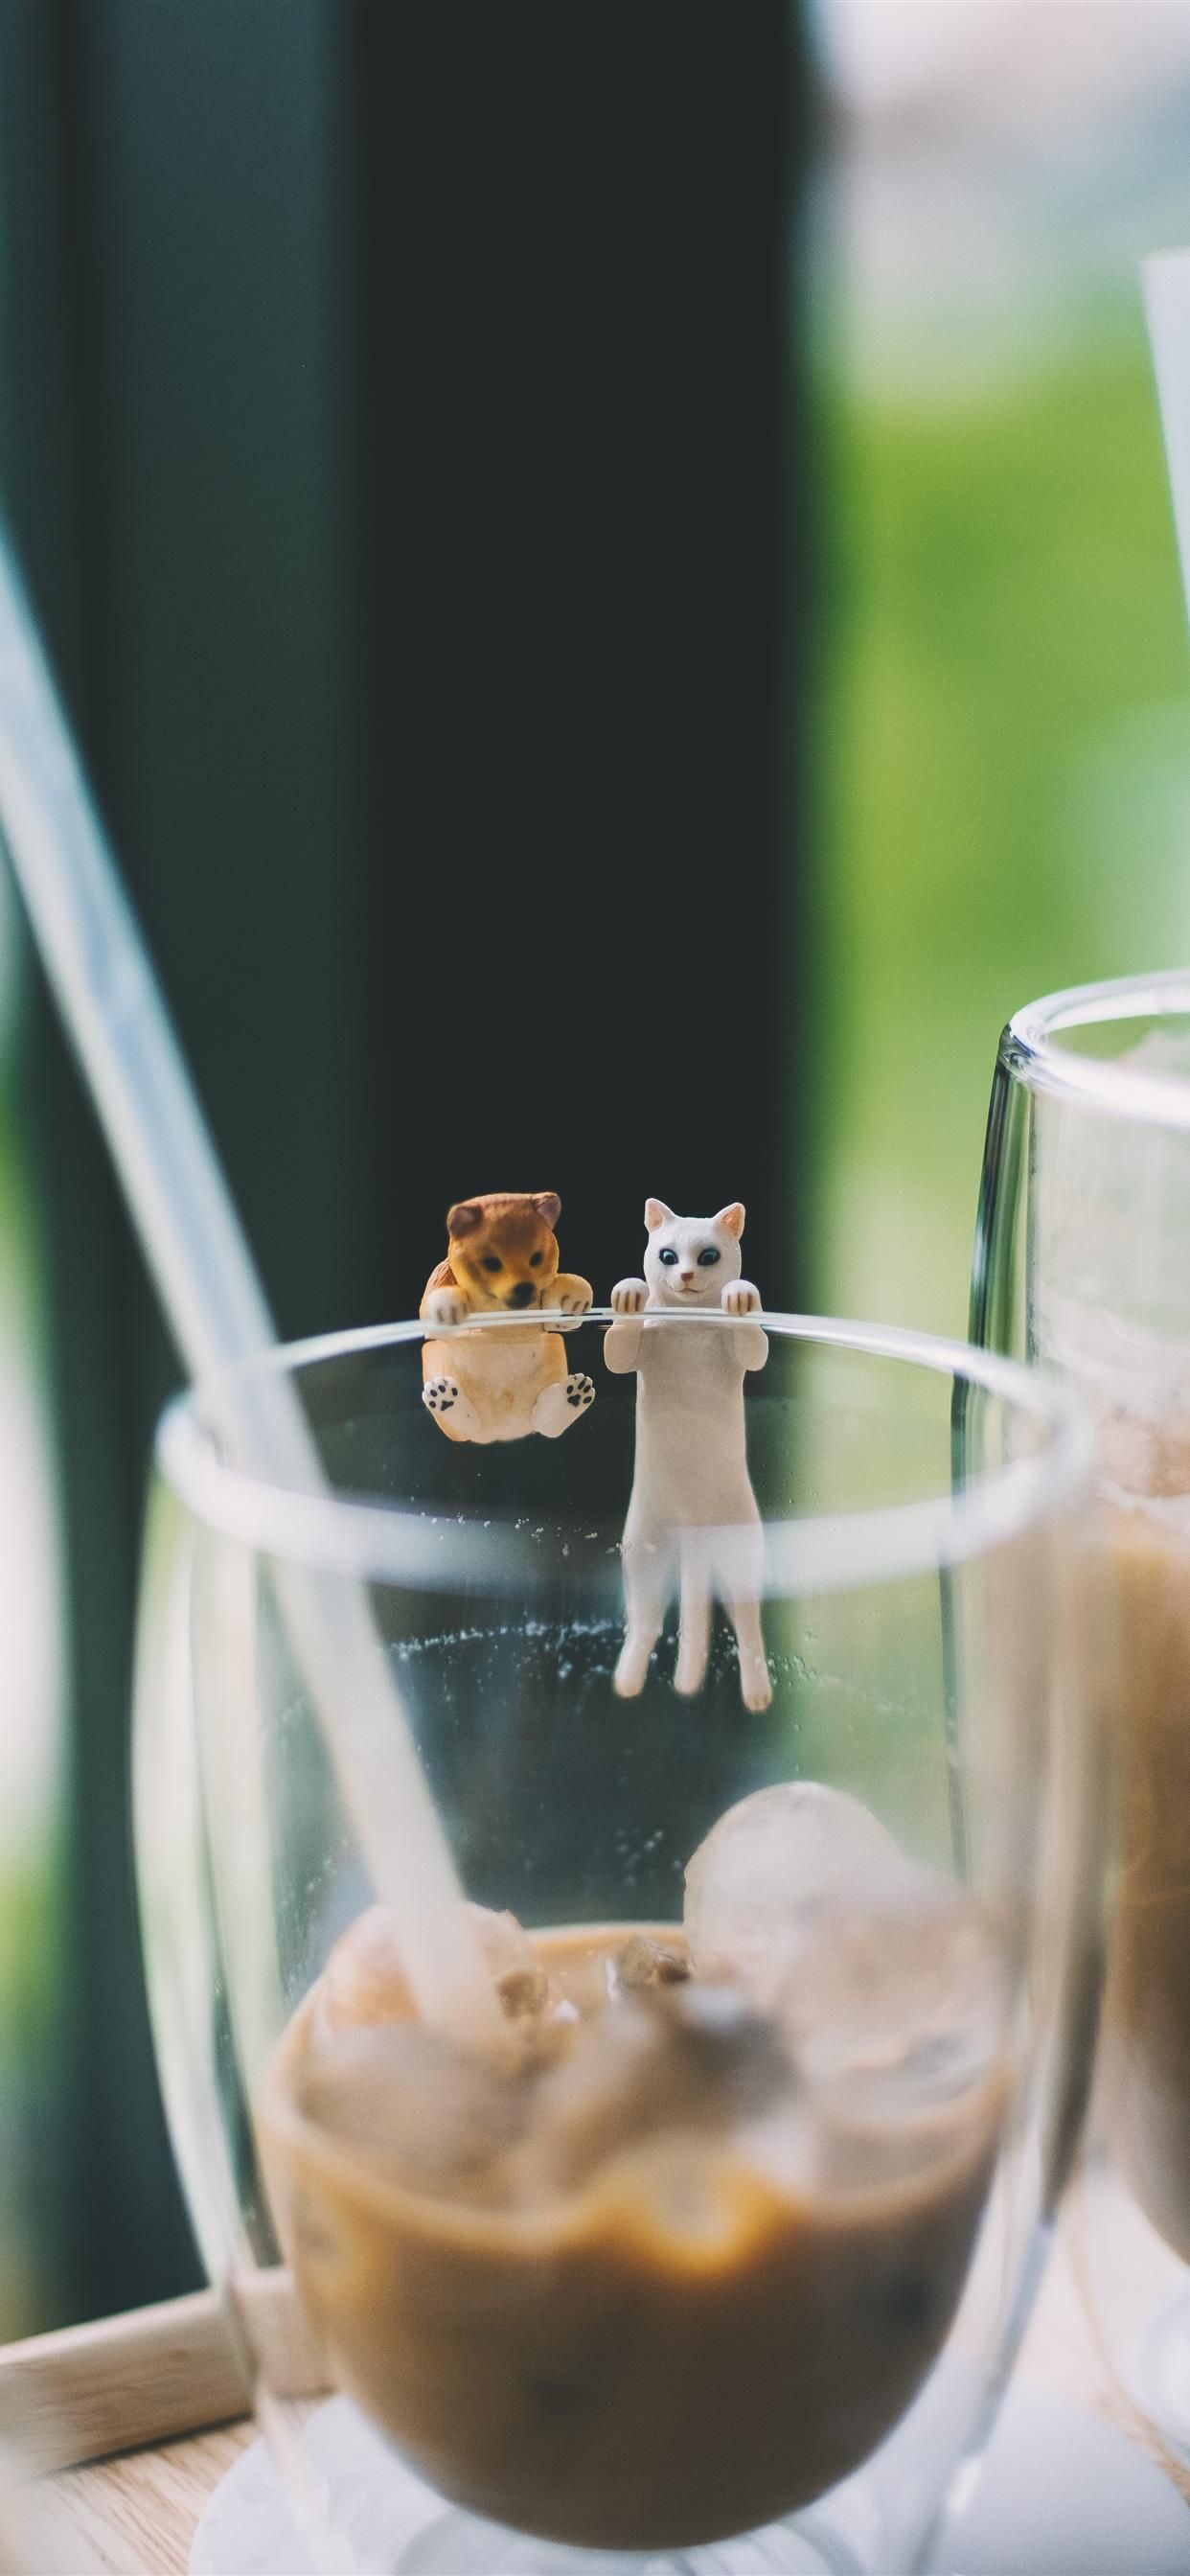 A glass of coffee with a cat on it - Cat, dog